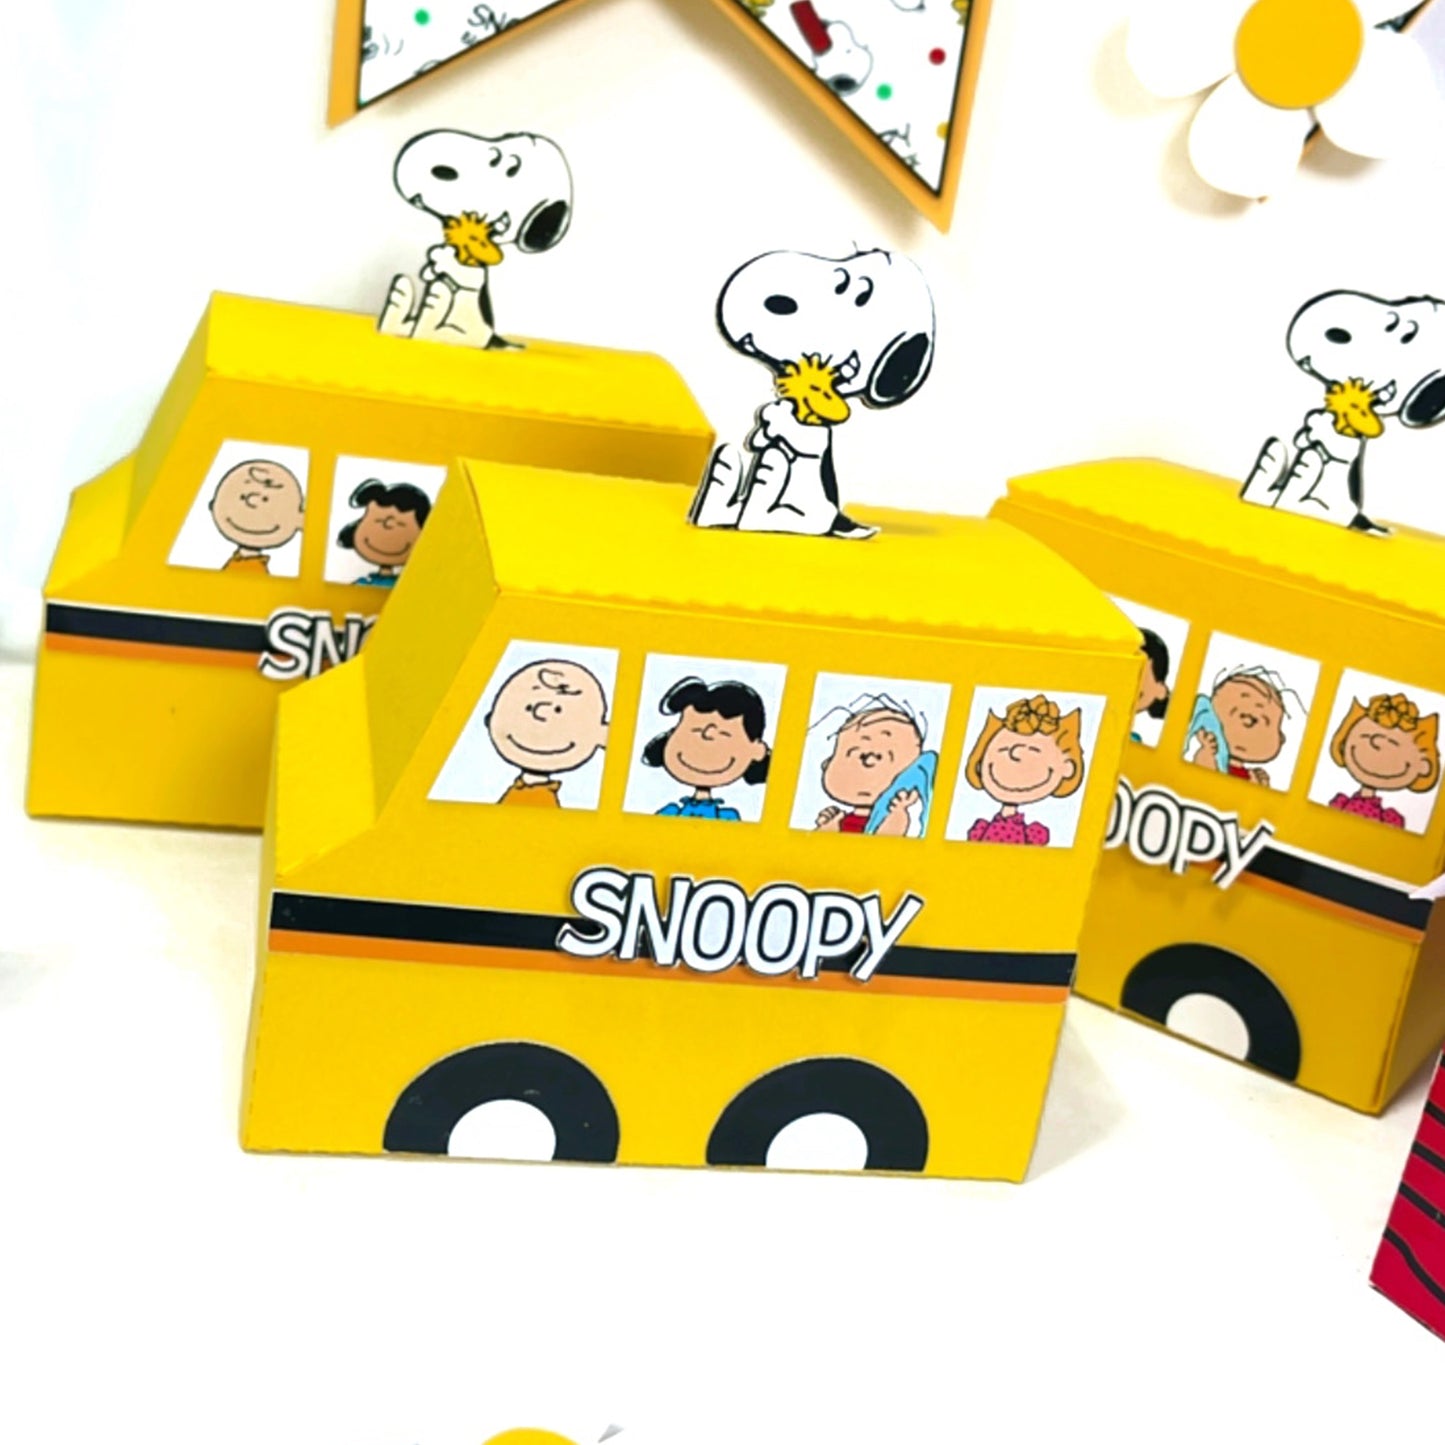 Snoopy Charlie brown peanuts Kit Party decor